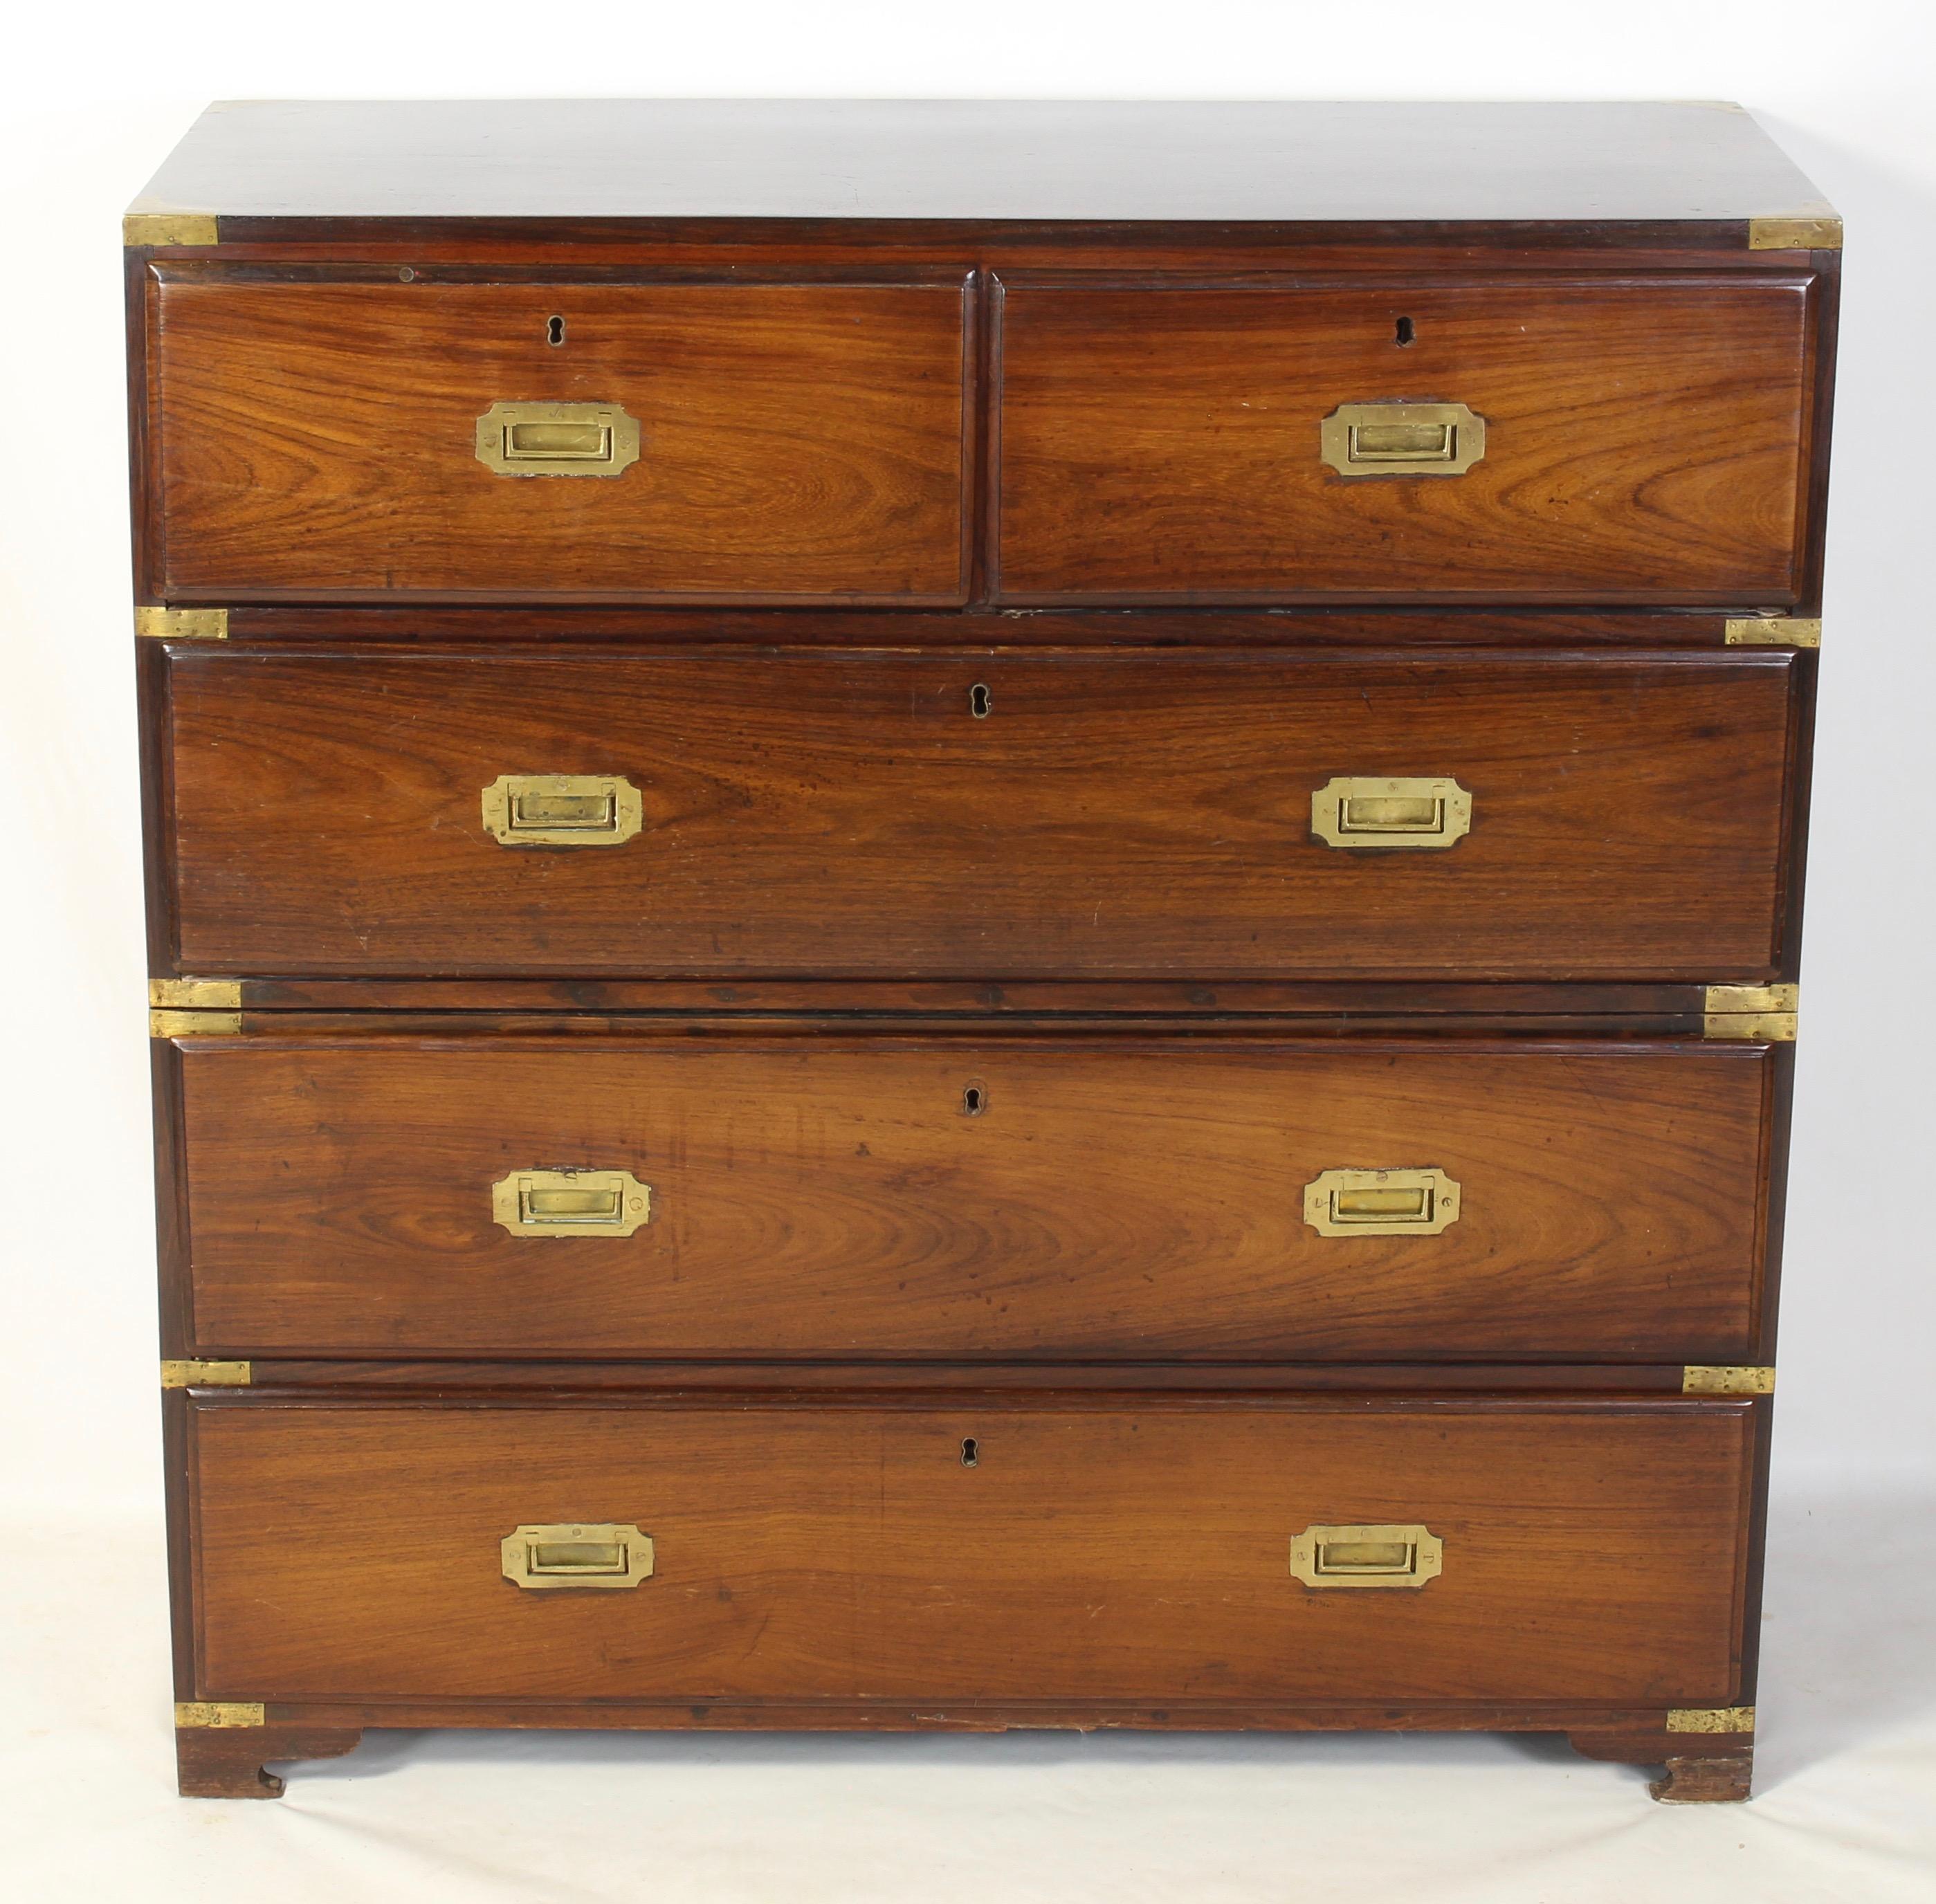 19th Century English Rosewood Campaign Chest of Drawers